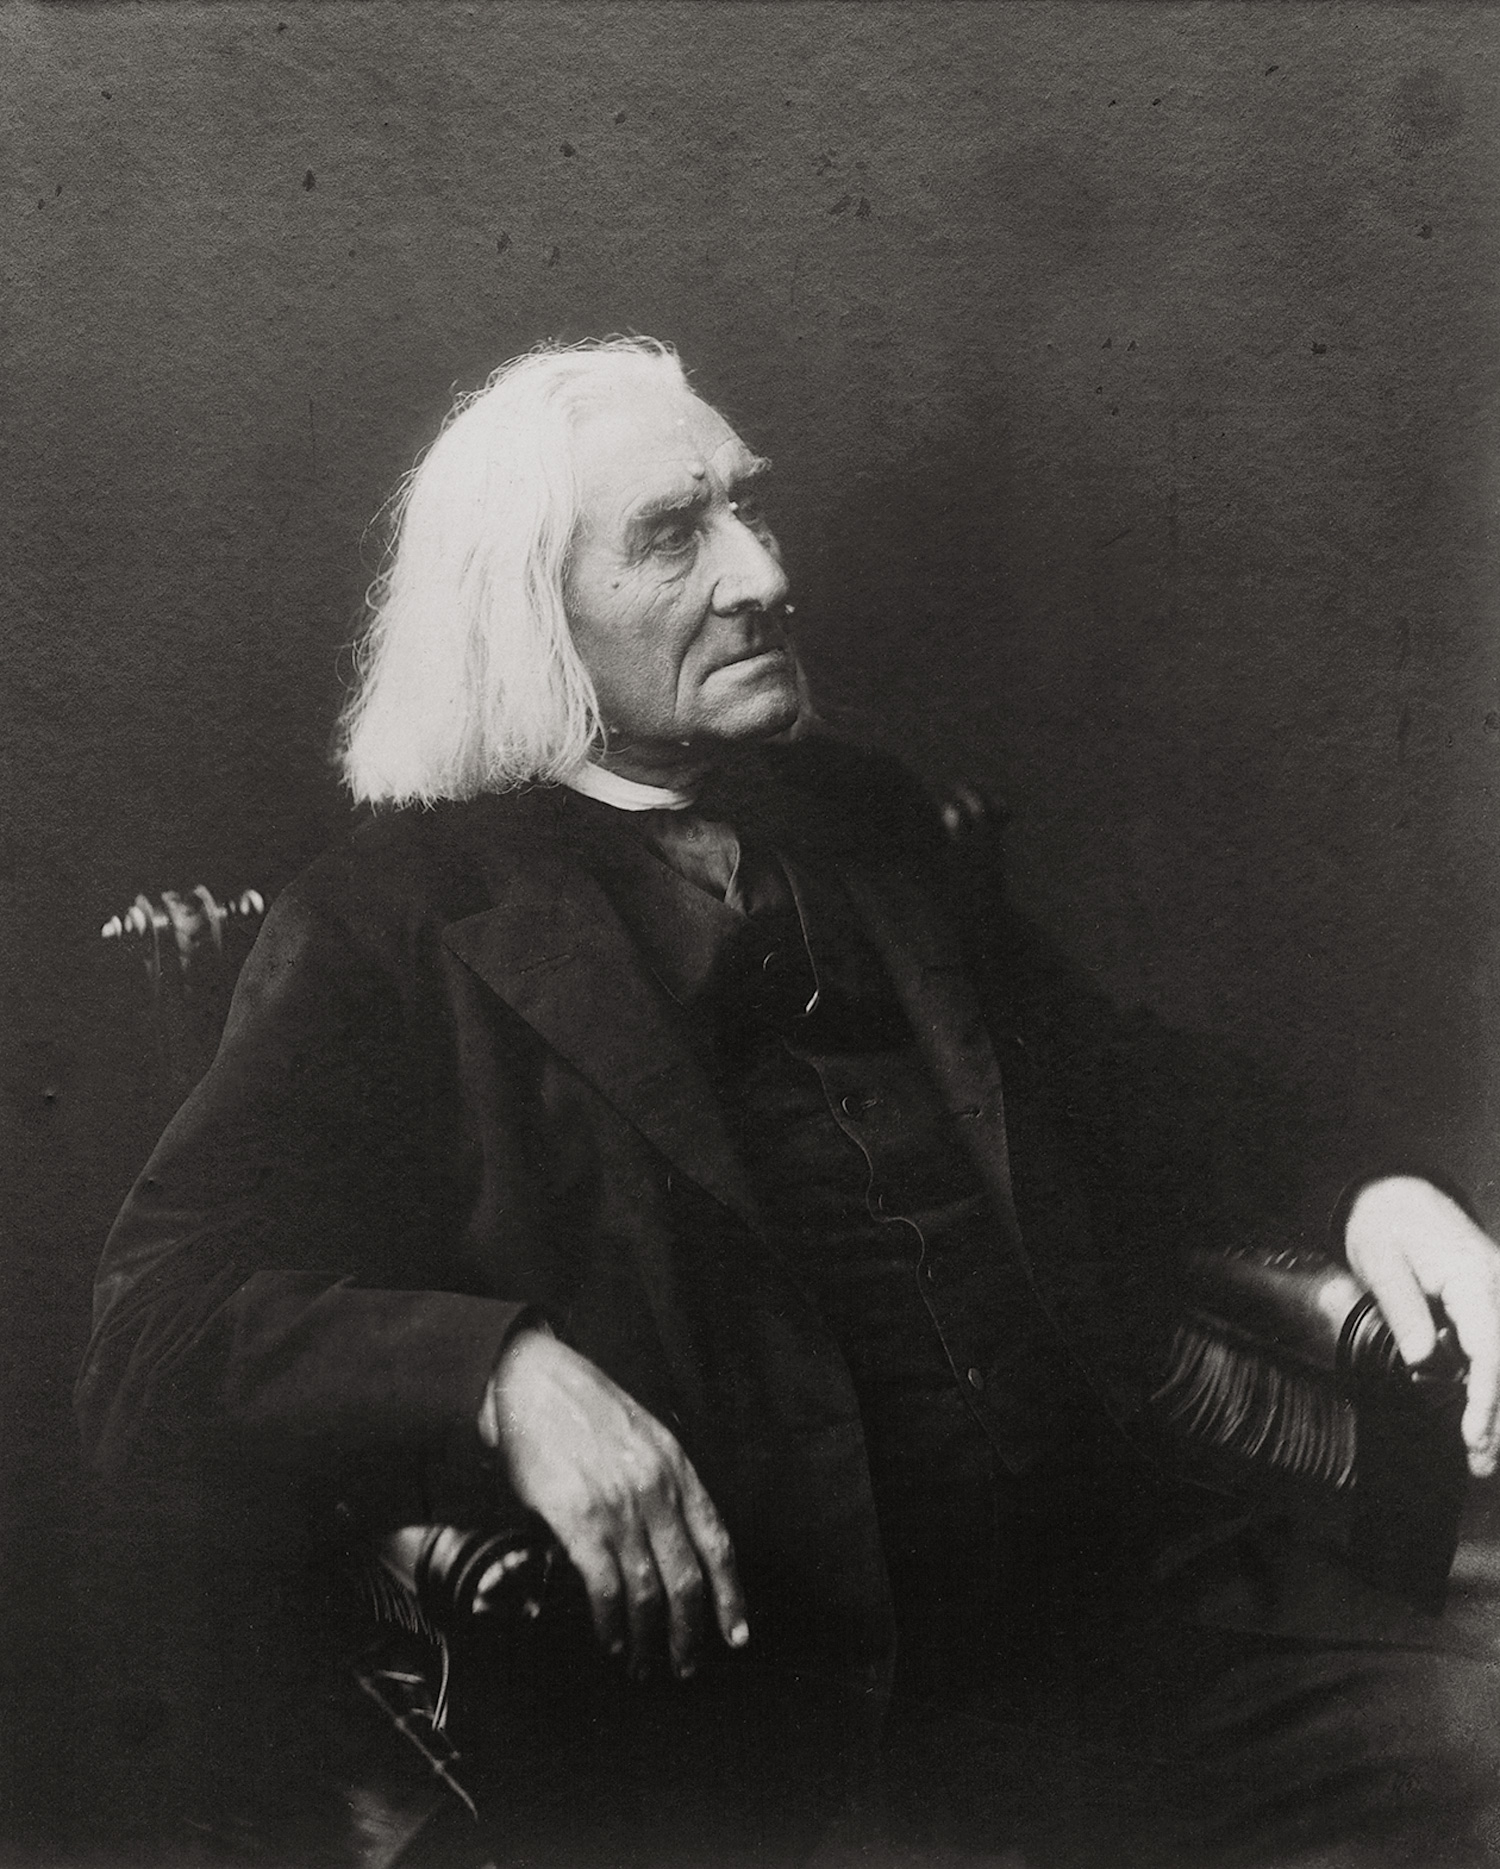 Portrait of Franz Liszt at age 75 by Louis Held, 1885